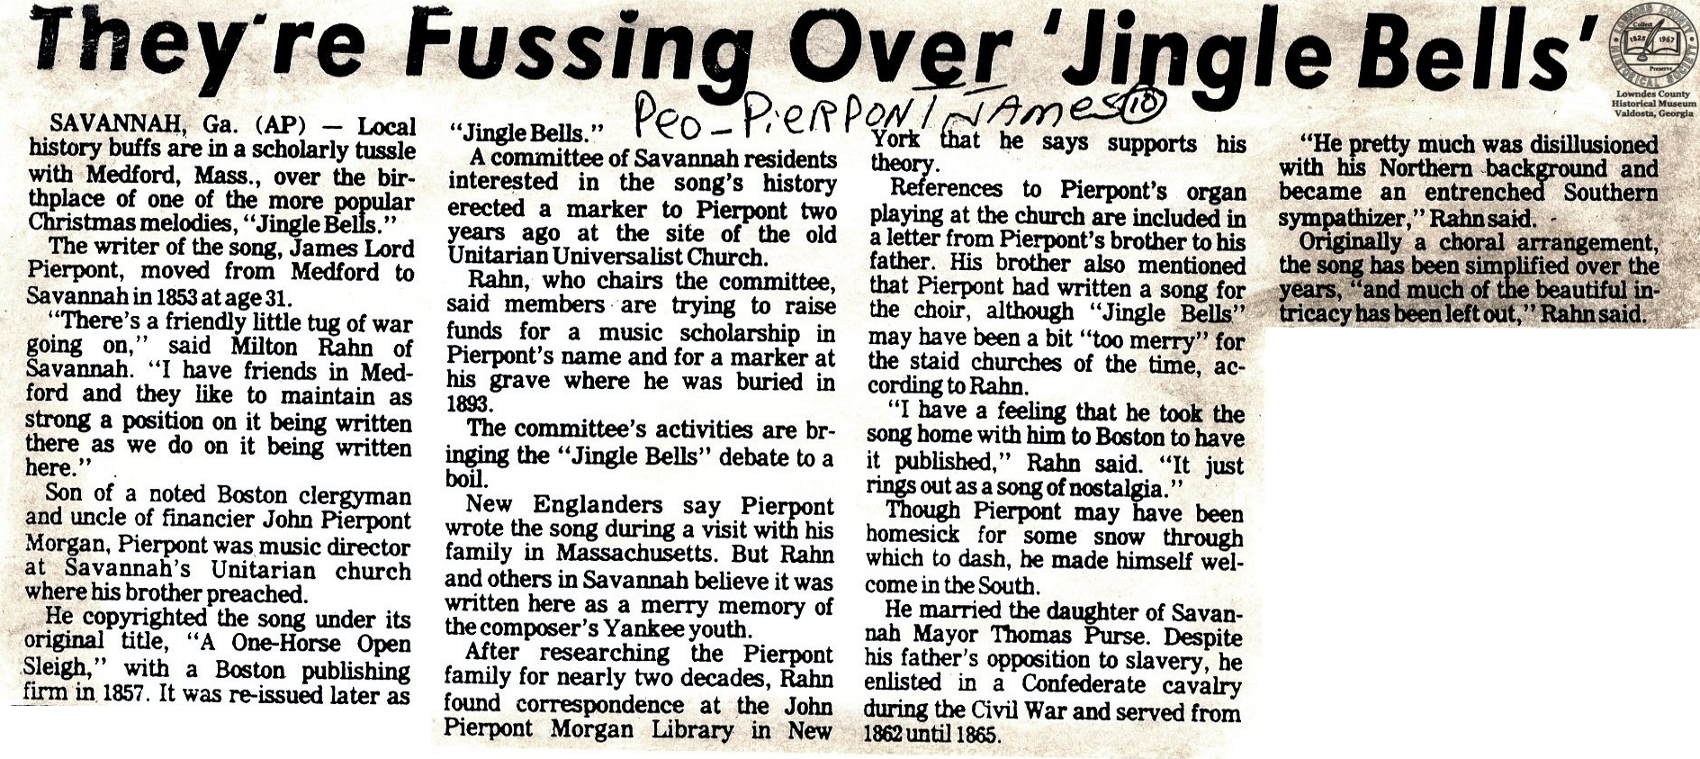 Article describing the issue over the origin of "Jingle Bells" from the Lowndes County Historical Museum's Susie McKey Thomas Newspaper Clipping Collection